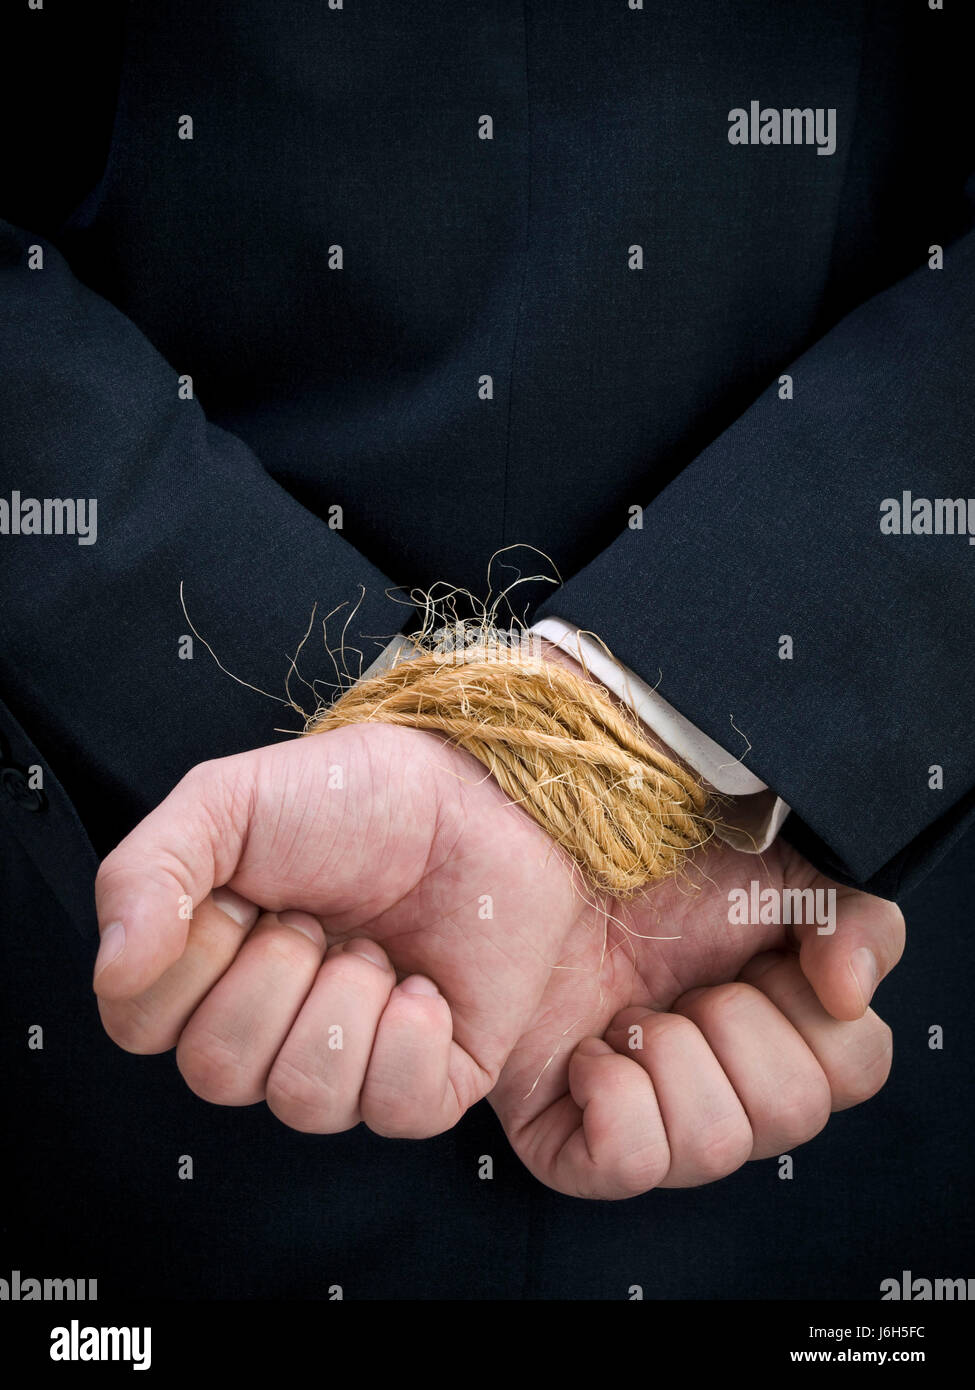 hand hands business man businessman bound tied back held rope suit guy close Stock Photo